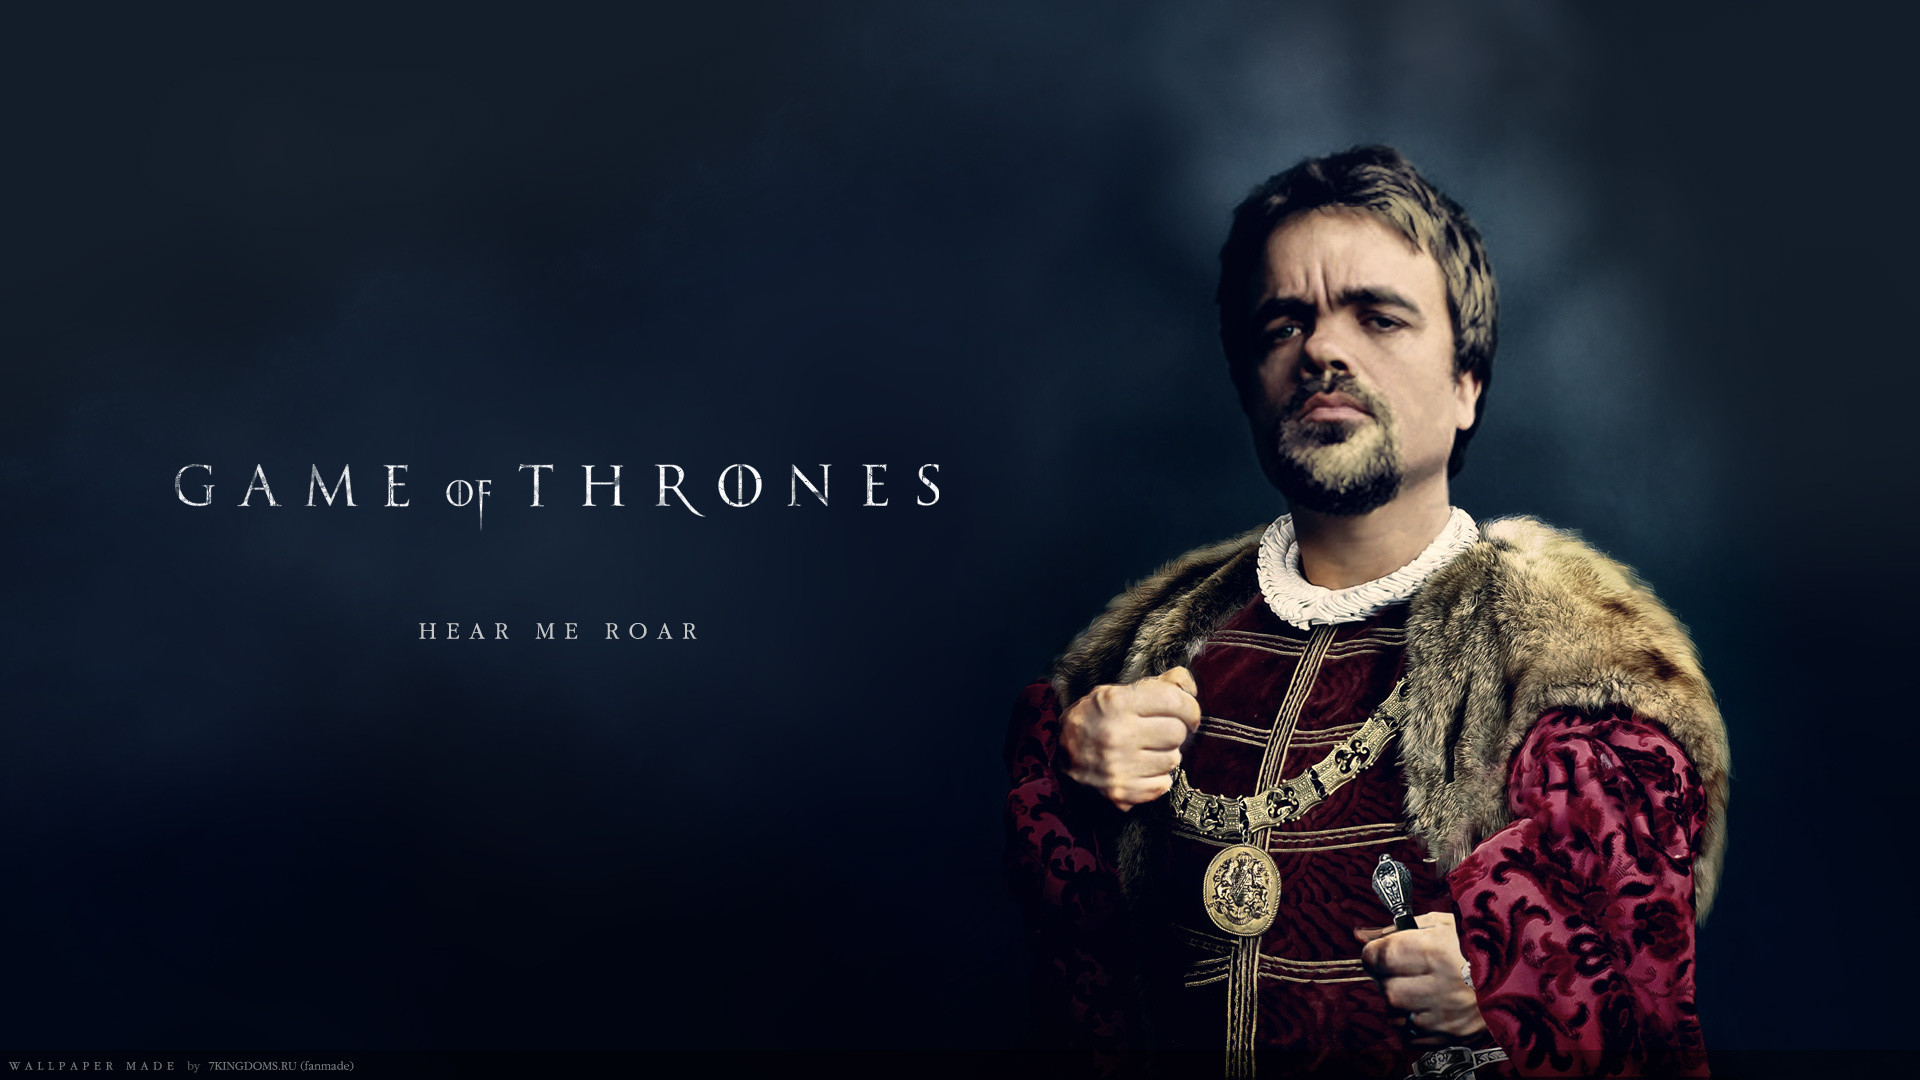 1920x1080 Tyrion Lannister - Game of Thrones Wallpaper (17631979) - Fanpop